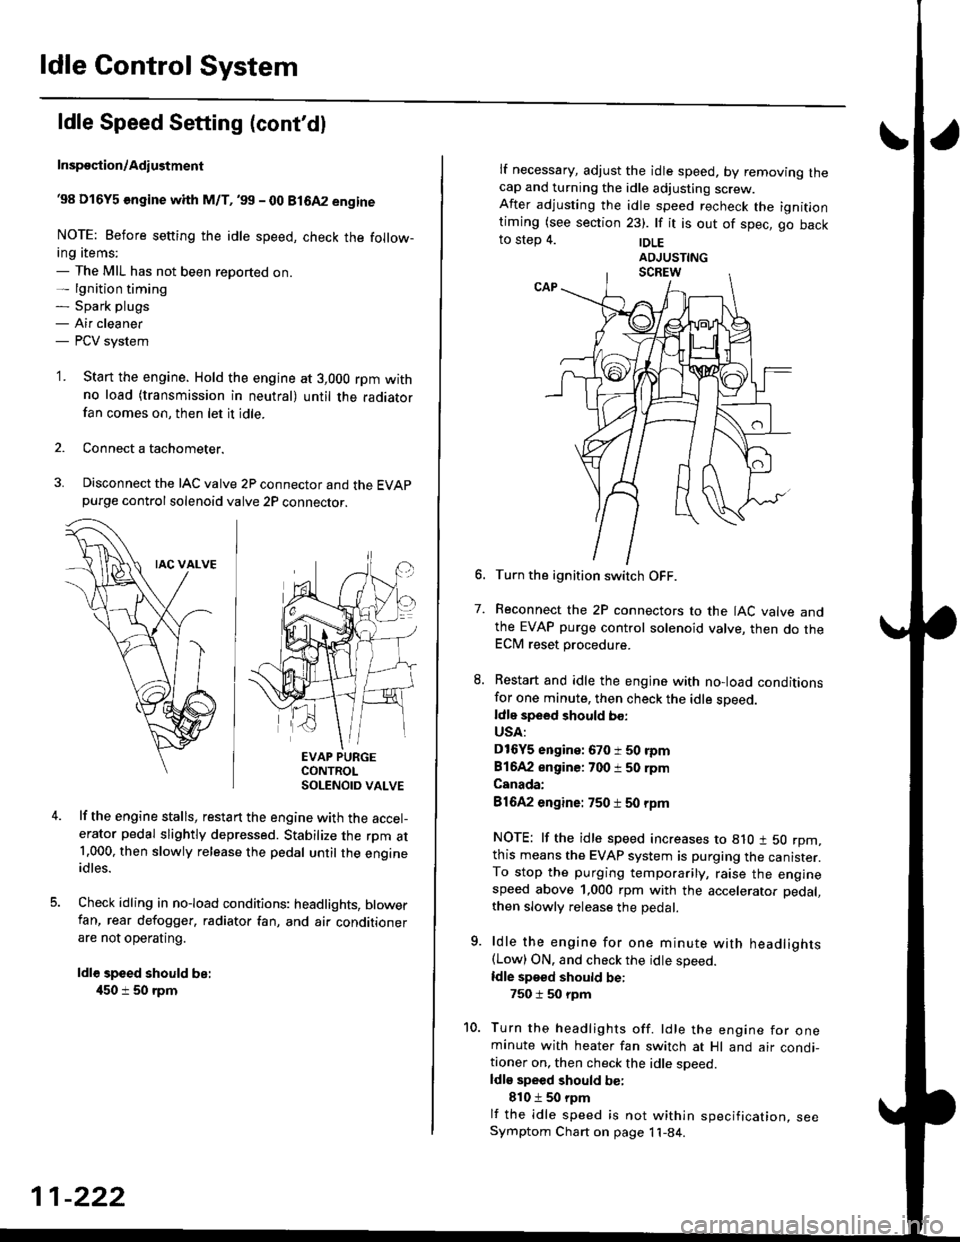 HONDA CIVIC 1996 6.G Workshop Manual ldle Control System
ldle Speed Setting (contdl
Inspeqtion/Adiustment
38 D16Y5 engine whh M/T,99 - 00 81642 engine
NOTE: Before setting the idle speed, check the follow-ing items;- The MIL has not be